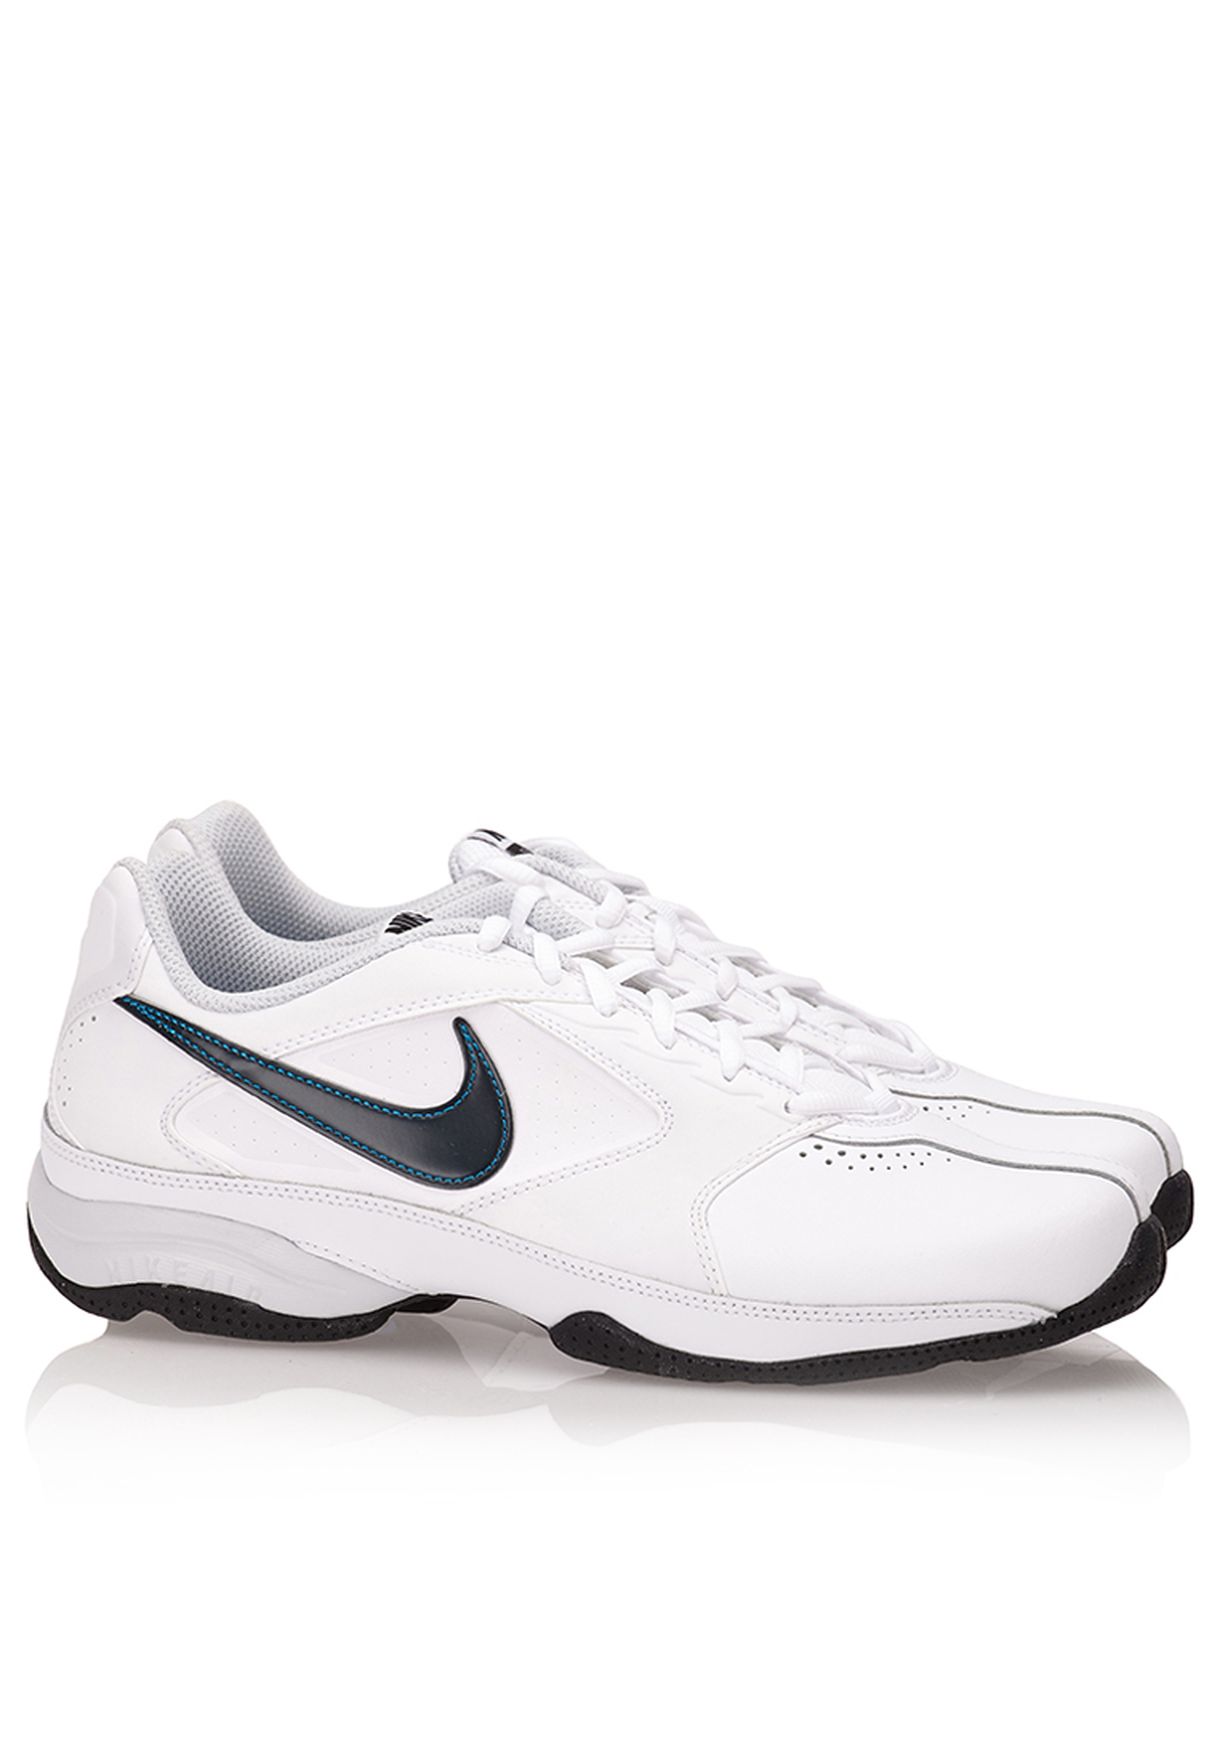 Air effect. Nike Air Effect. Nike Air Effect 2010. Nike Air affect. Кроссовки Air affect v Leather Nike.